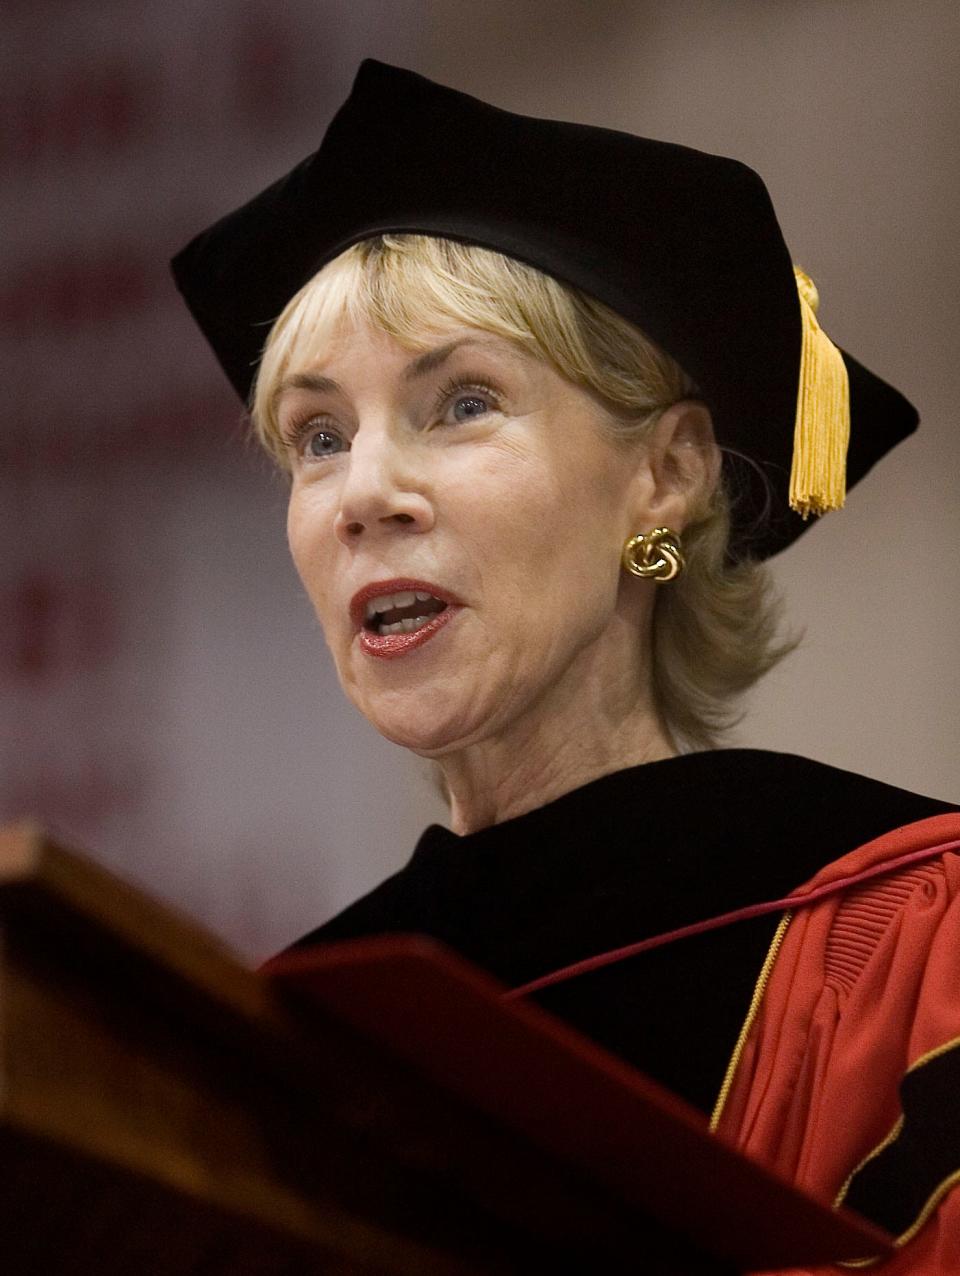 FSC president Anne Kerr speaks during the 123rd Commencement Convocation at Florida Southern College in Lakeland on May 3, 2008.